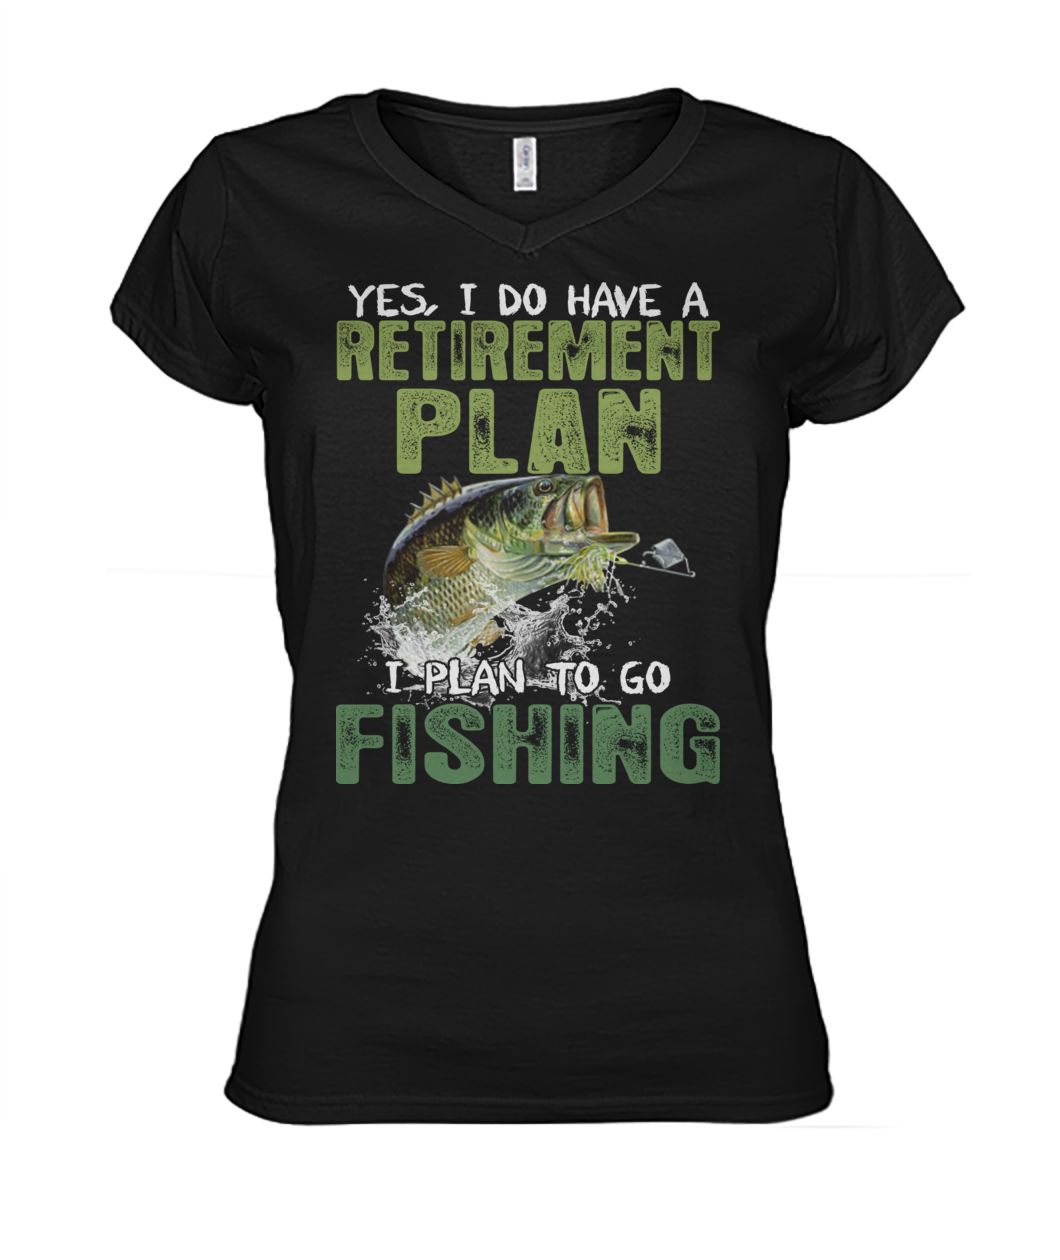 Yes I do have a retirement plan I plan to go fishing women's v-neck